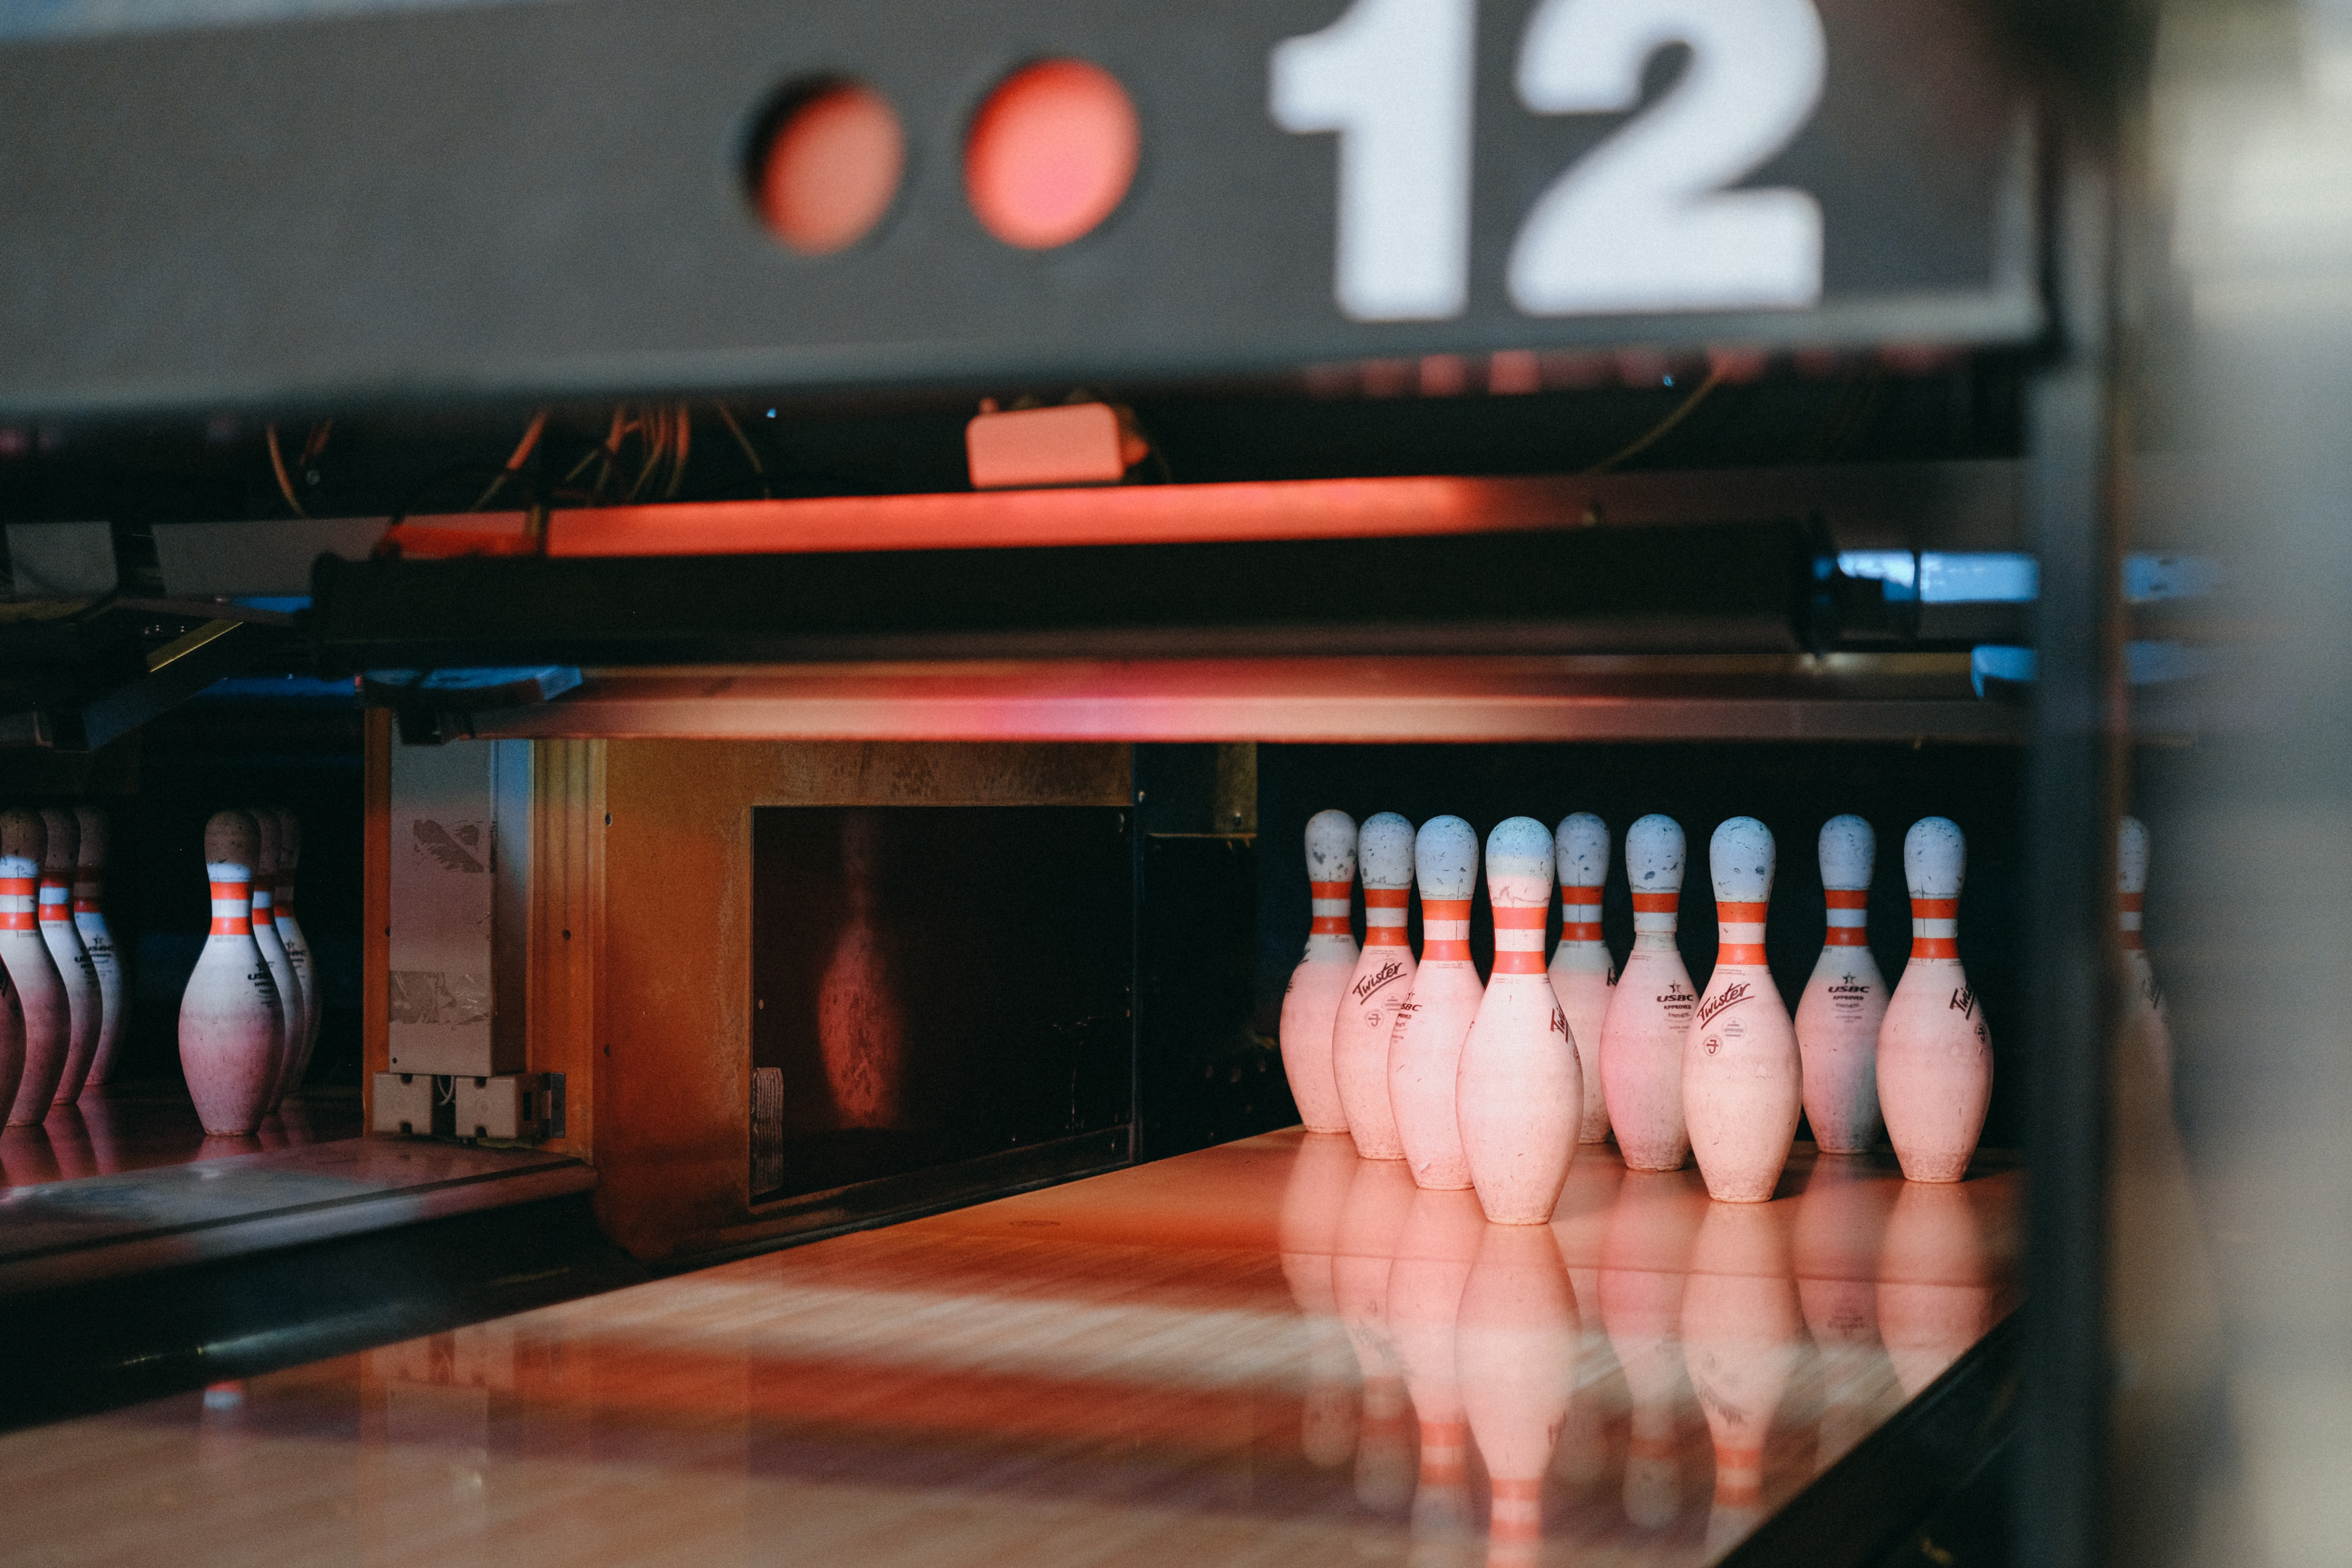 Bowling pins underneath a red light